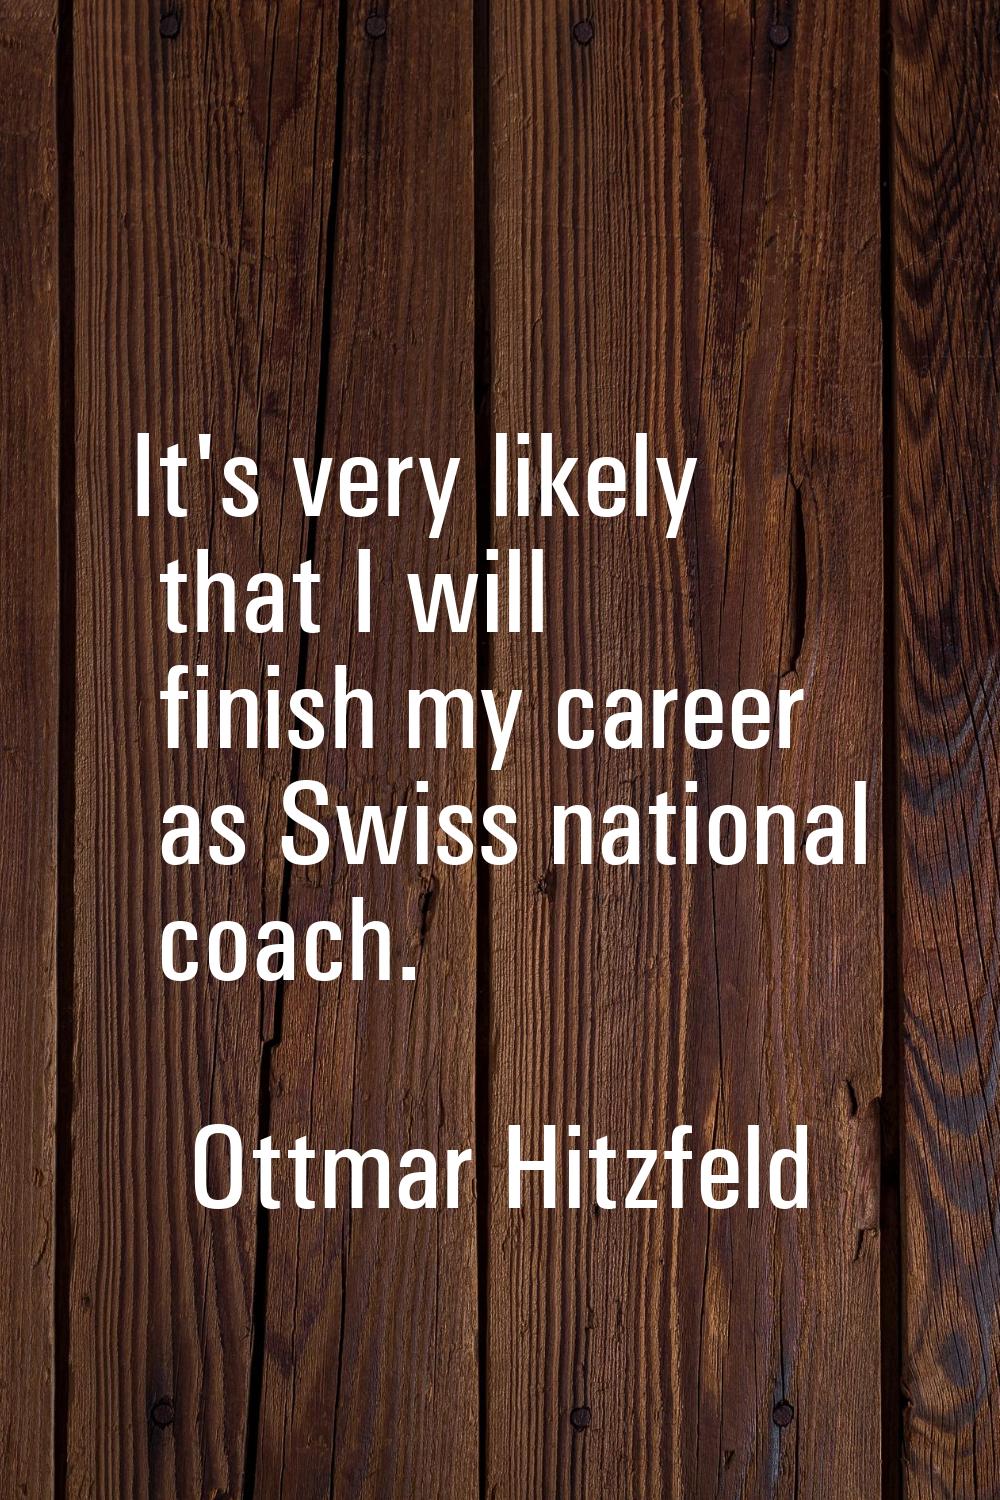 It's very likely that I will finish my career as Swiss national coach.